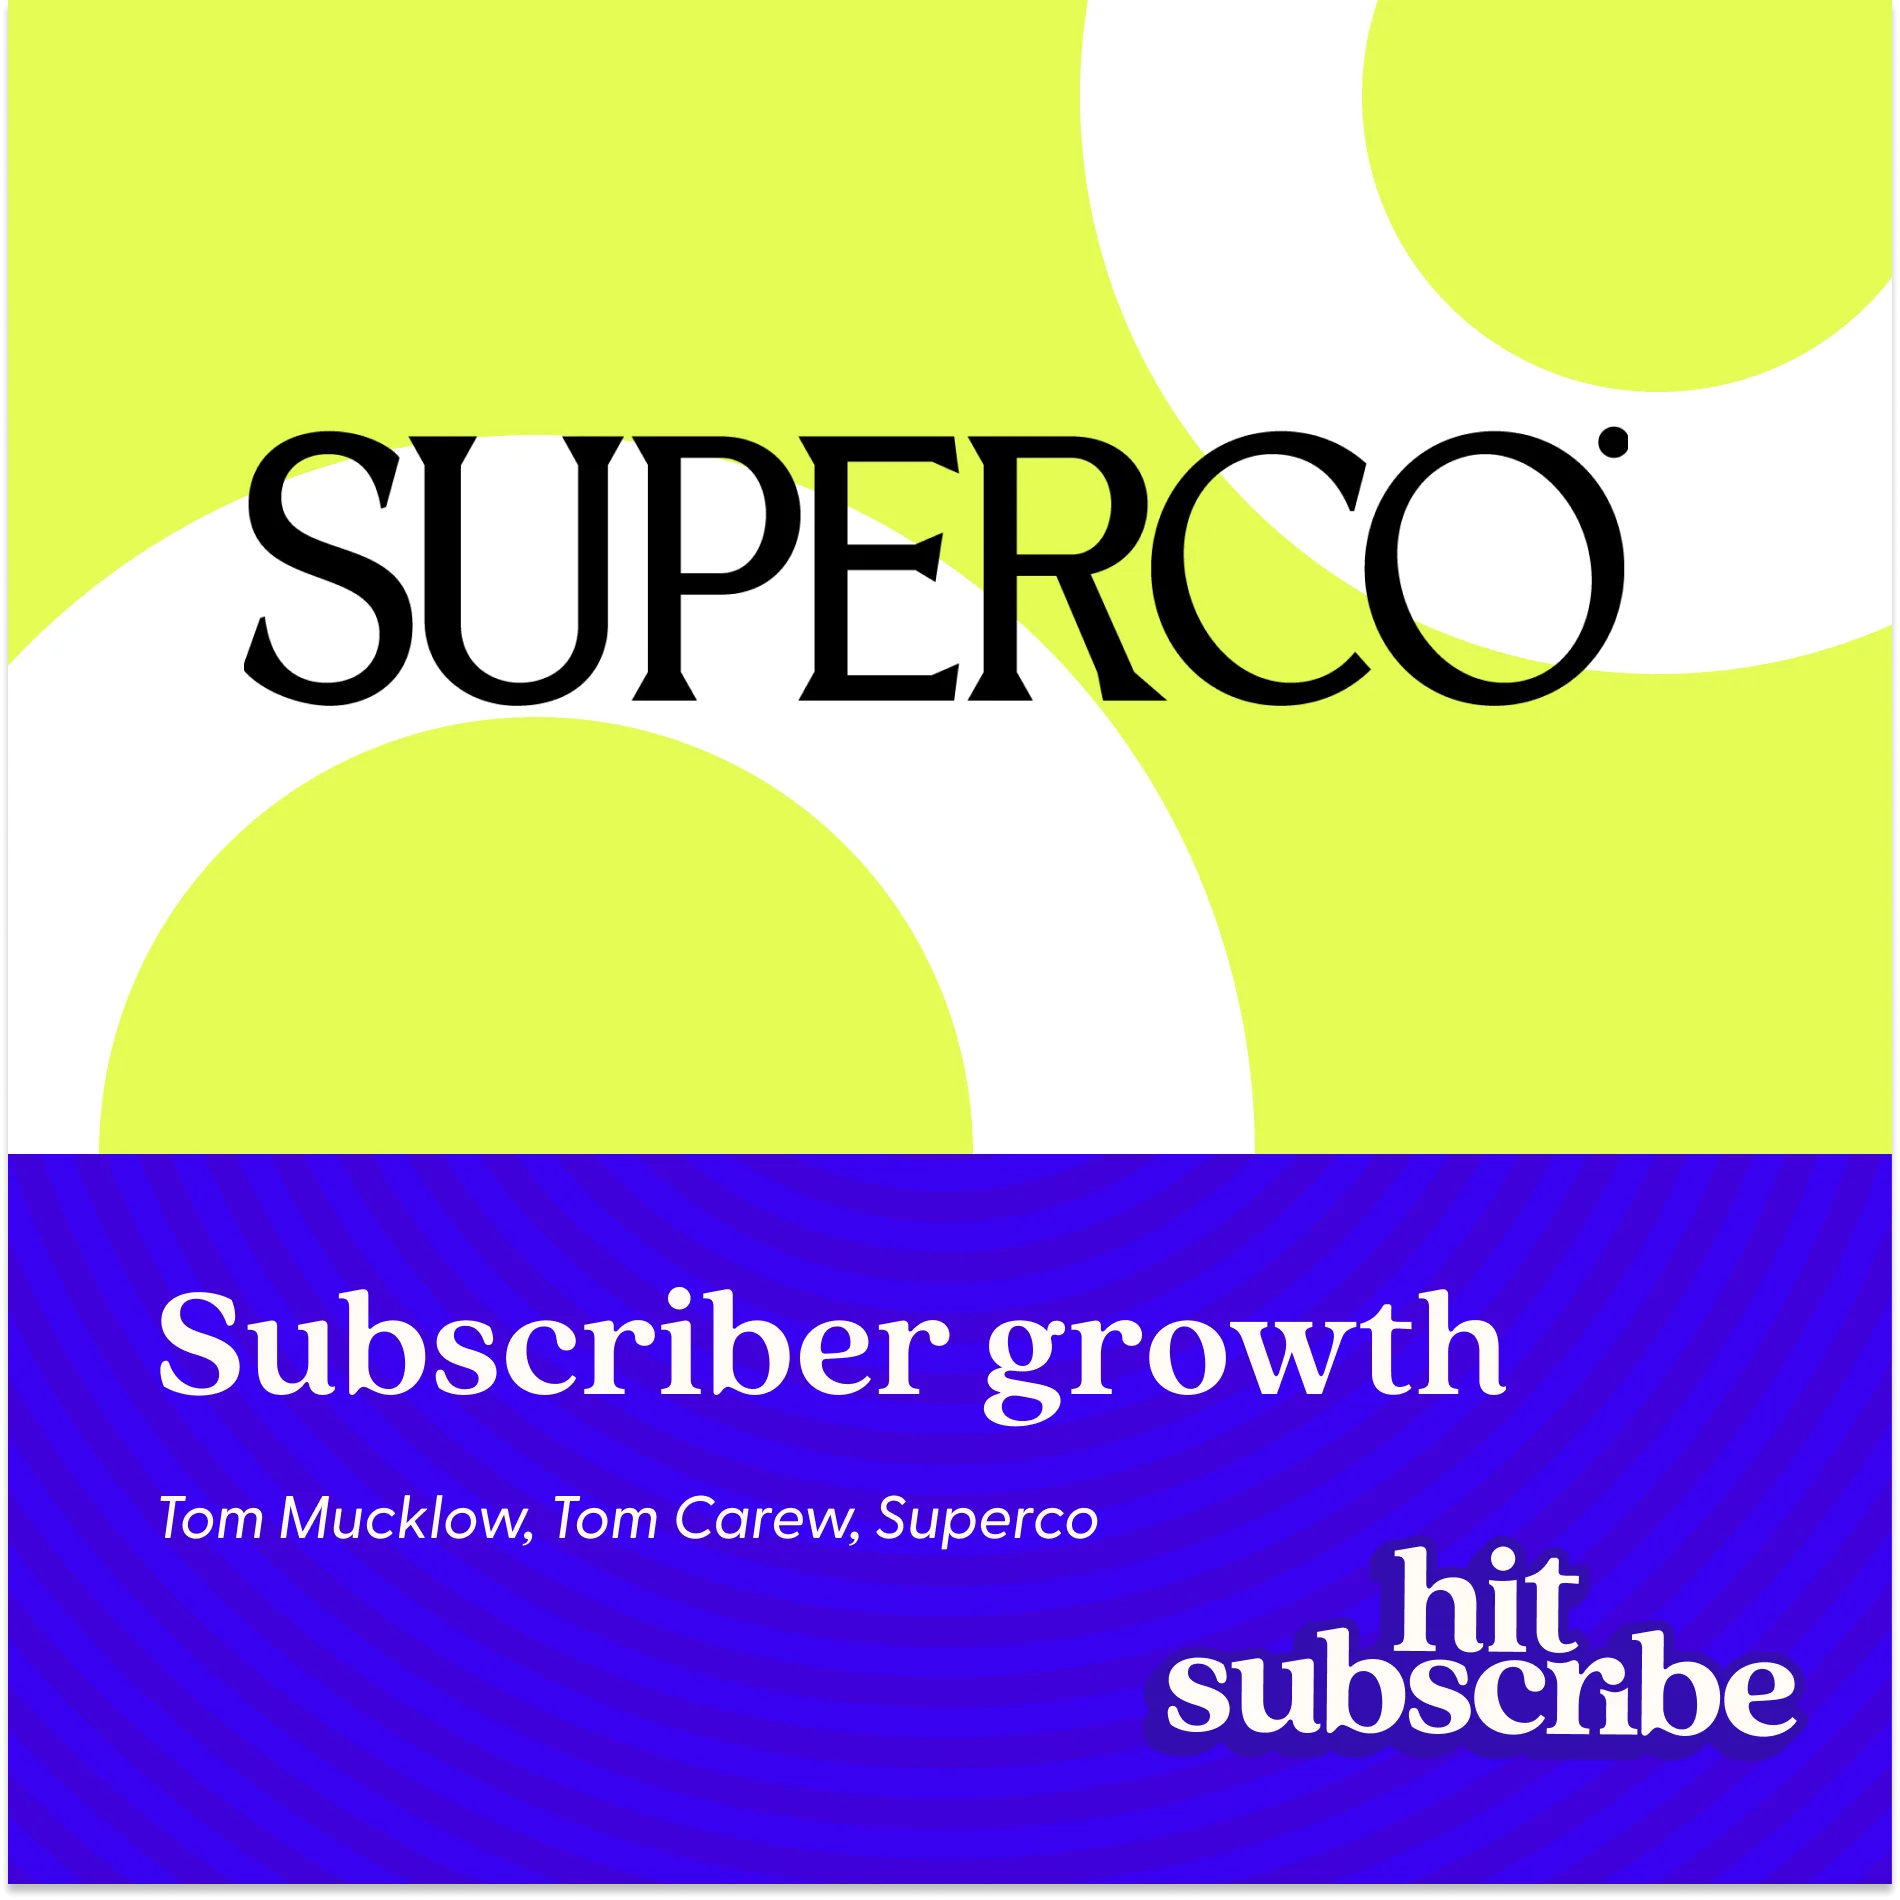 Hit Subscribe podcast episode cover featuring Tom Mucklow & Tom Carew, Superco